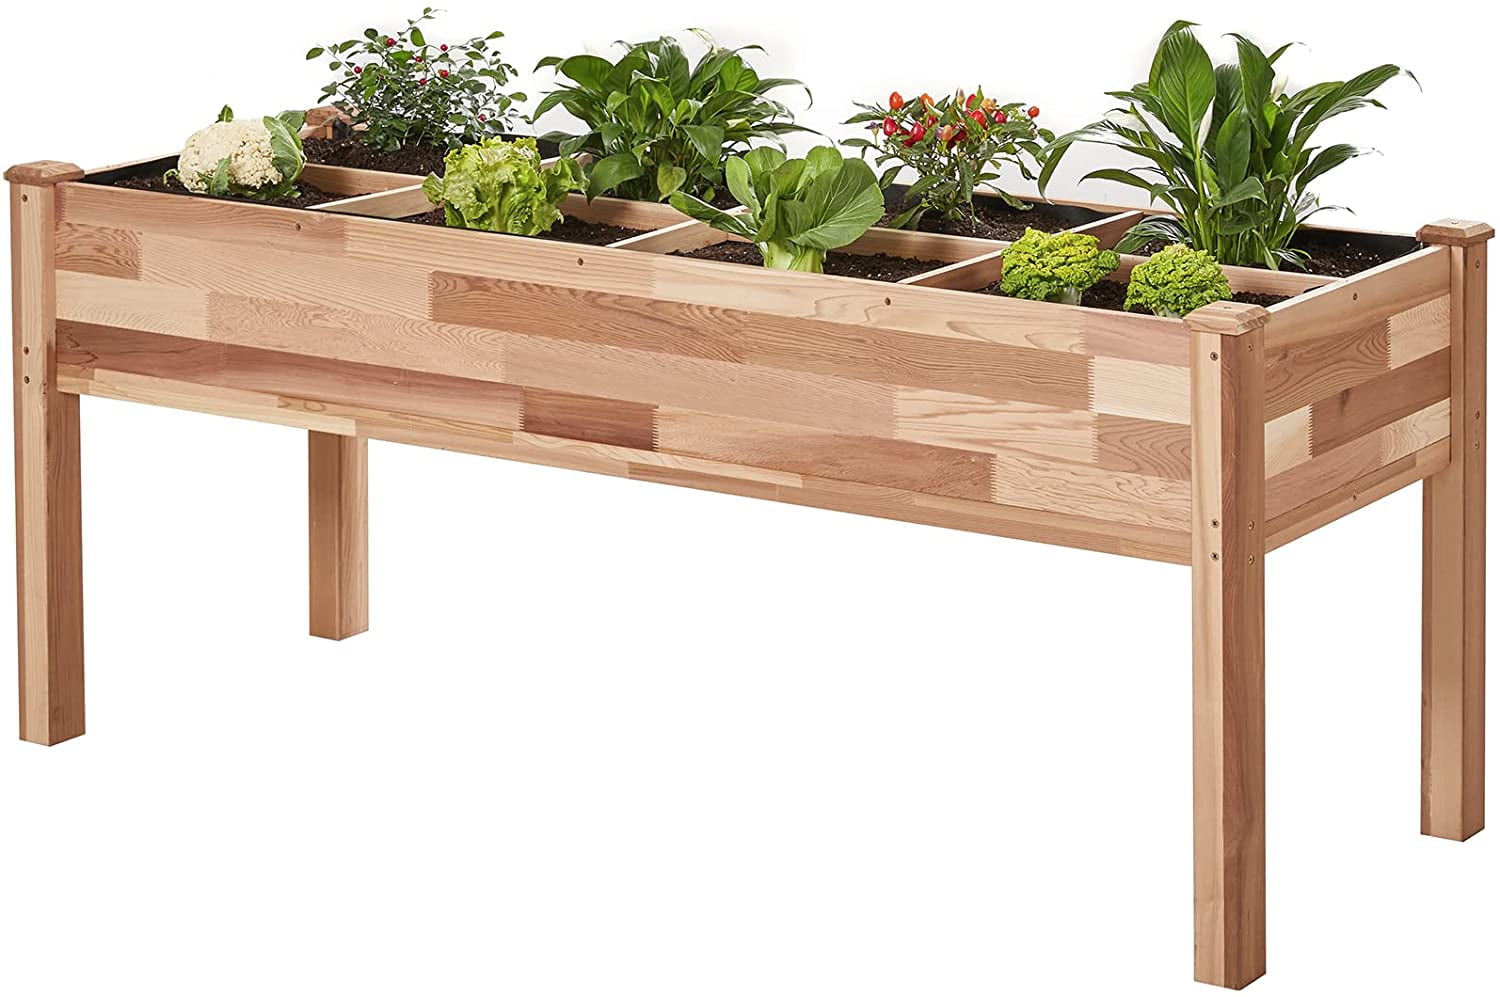 Flowers & Succulents 95 X 49 X 10H - Grow Fresh Vegetables Beautiful Elevated Garden Bed for Your Yard and Home Gardening Herb Gardens CedarCraft Raised Cedar Garden Bed No Tools Required. 